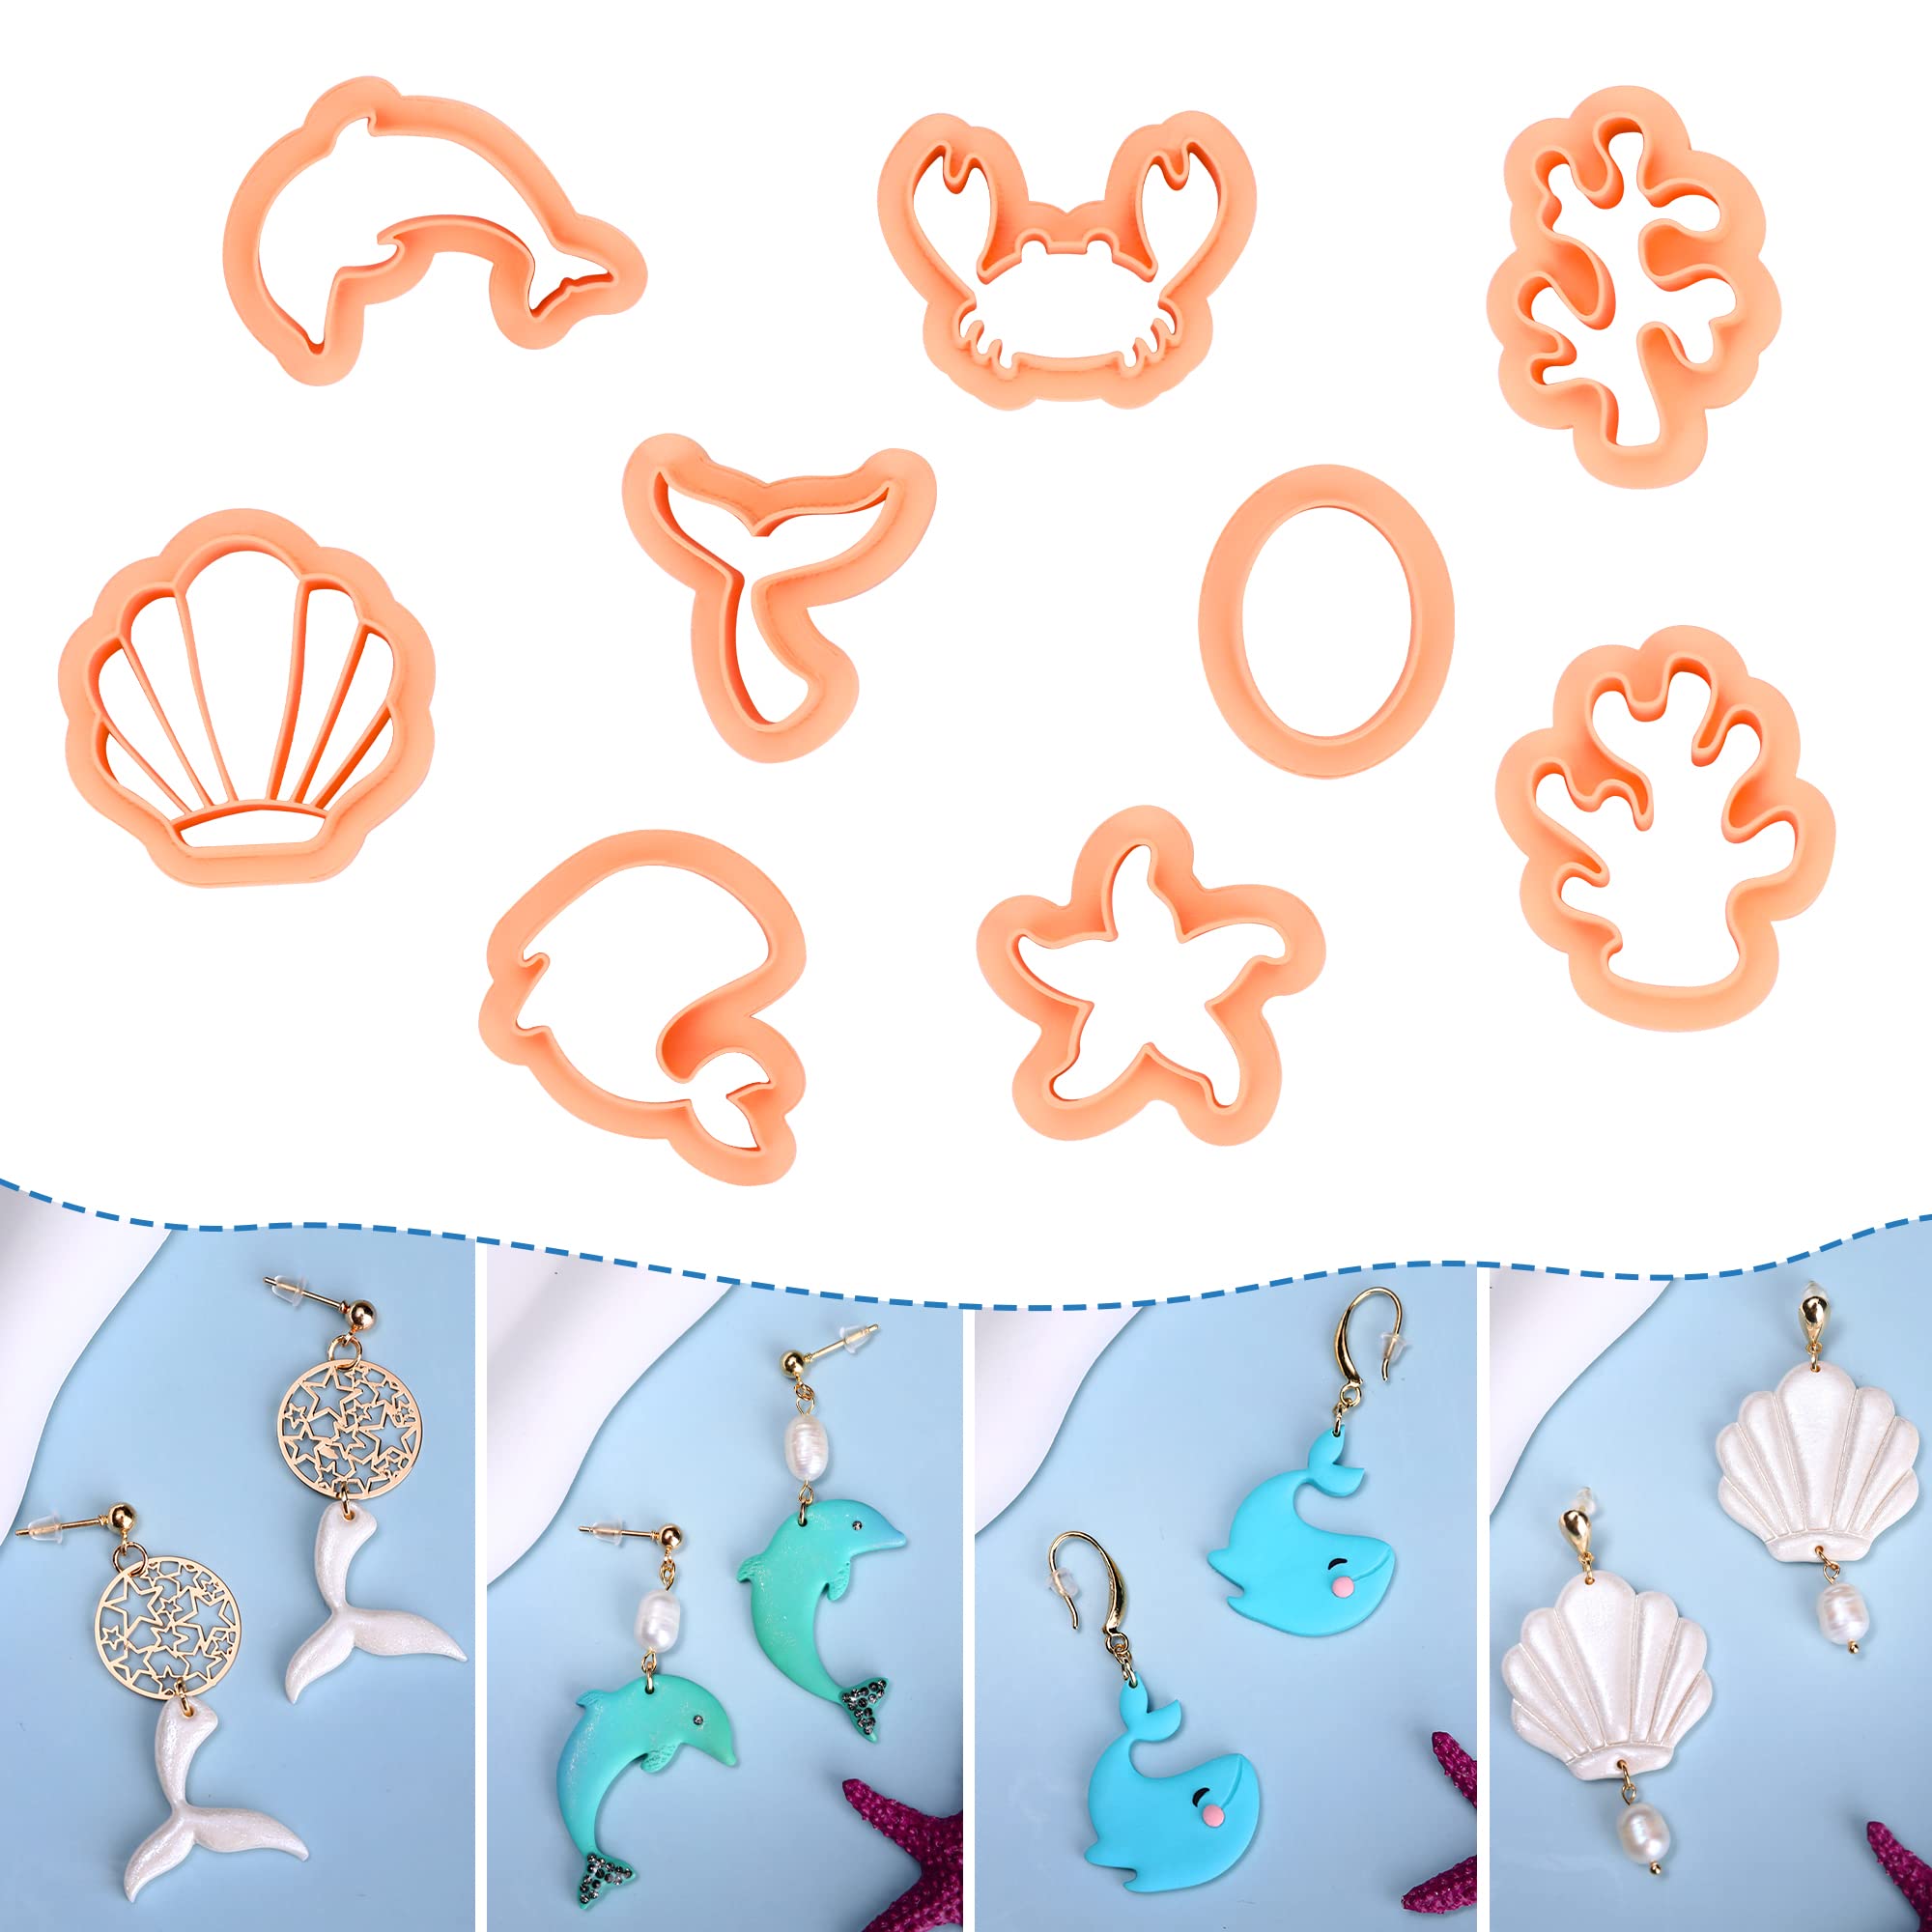 21PCS Polymer Clay Cutters Set Earring Jewelry Cutting Mold Tool